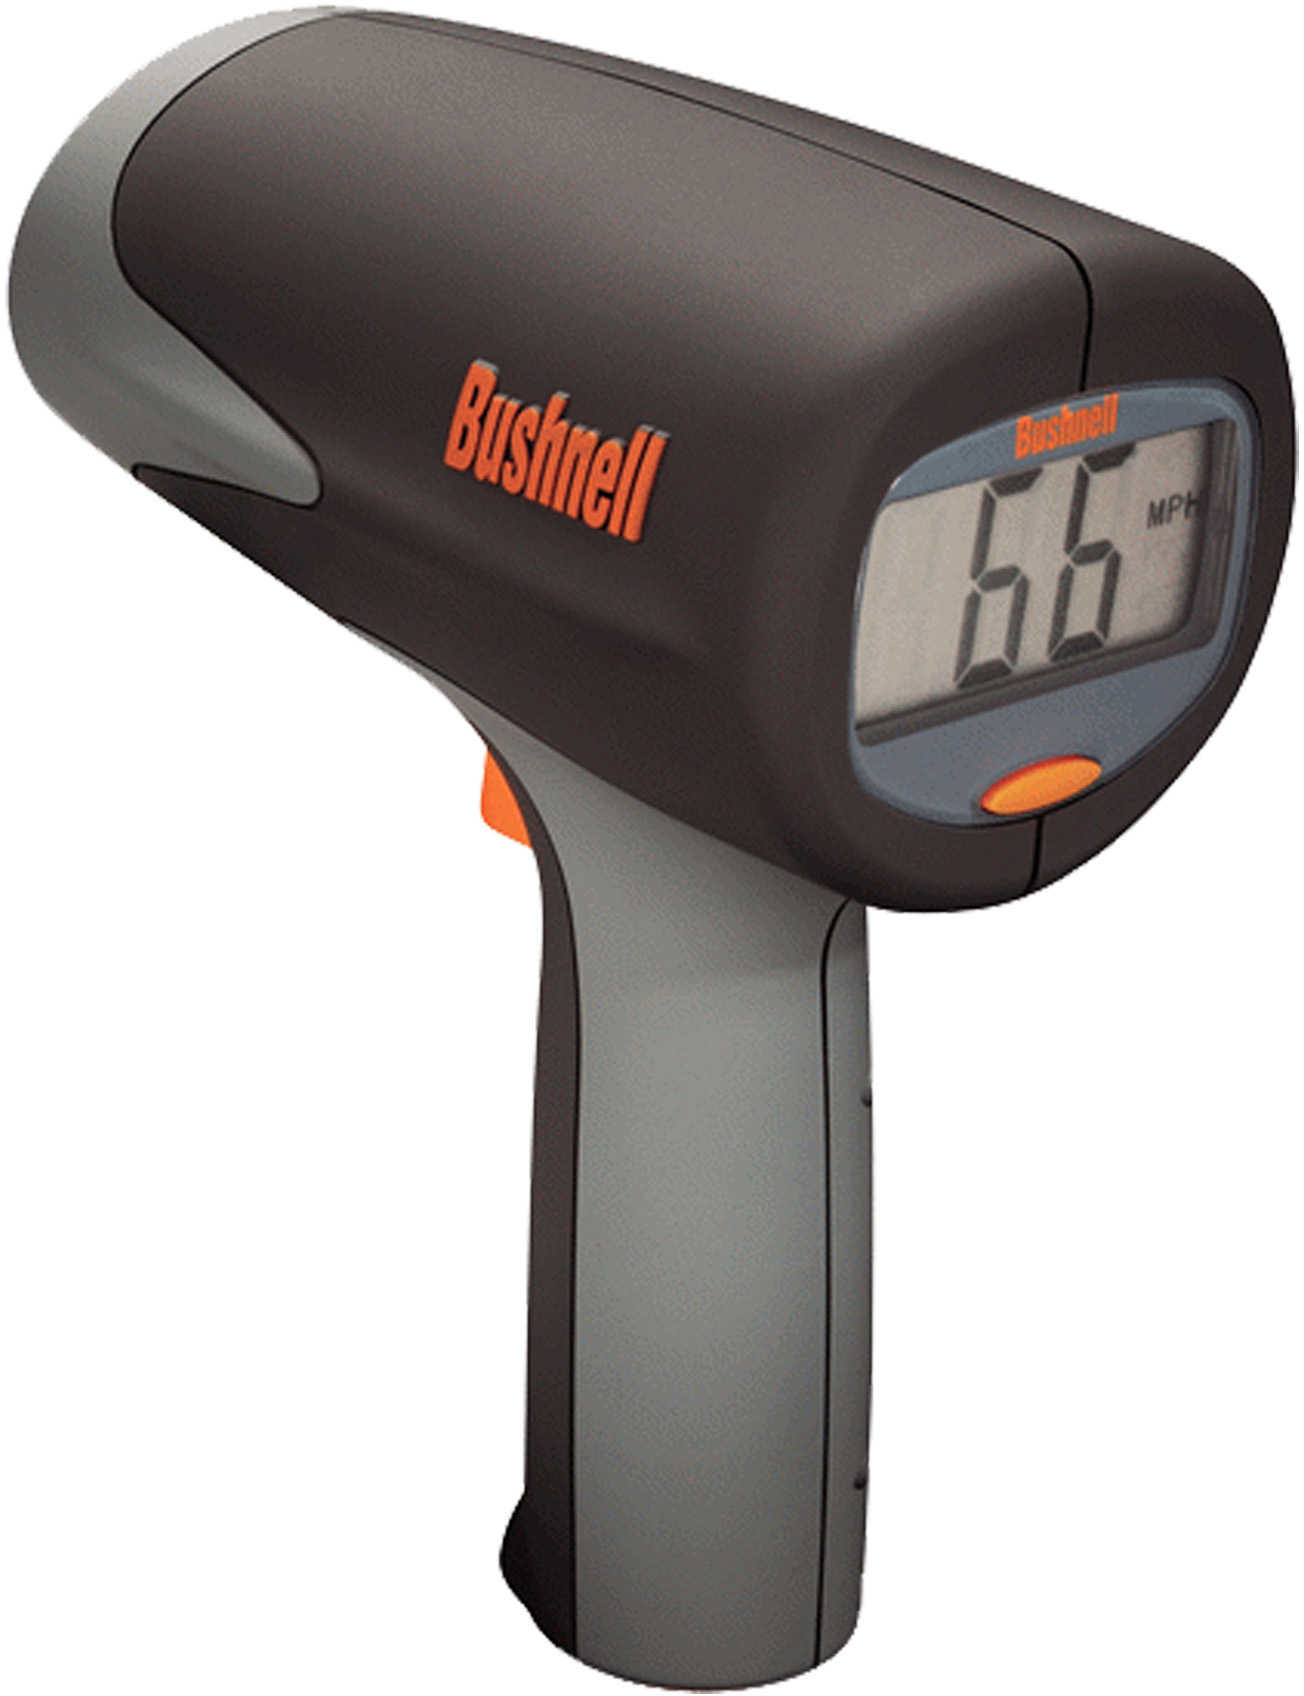 Bushnell Velocity Speed Gun Easy-To-Use Point-And-Shoot Pistol Grip - Large Clear Lcd Display Displays fastest